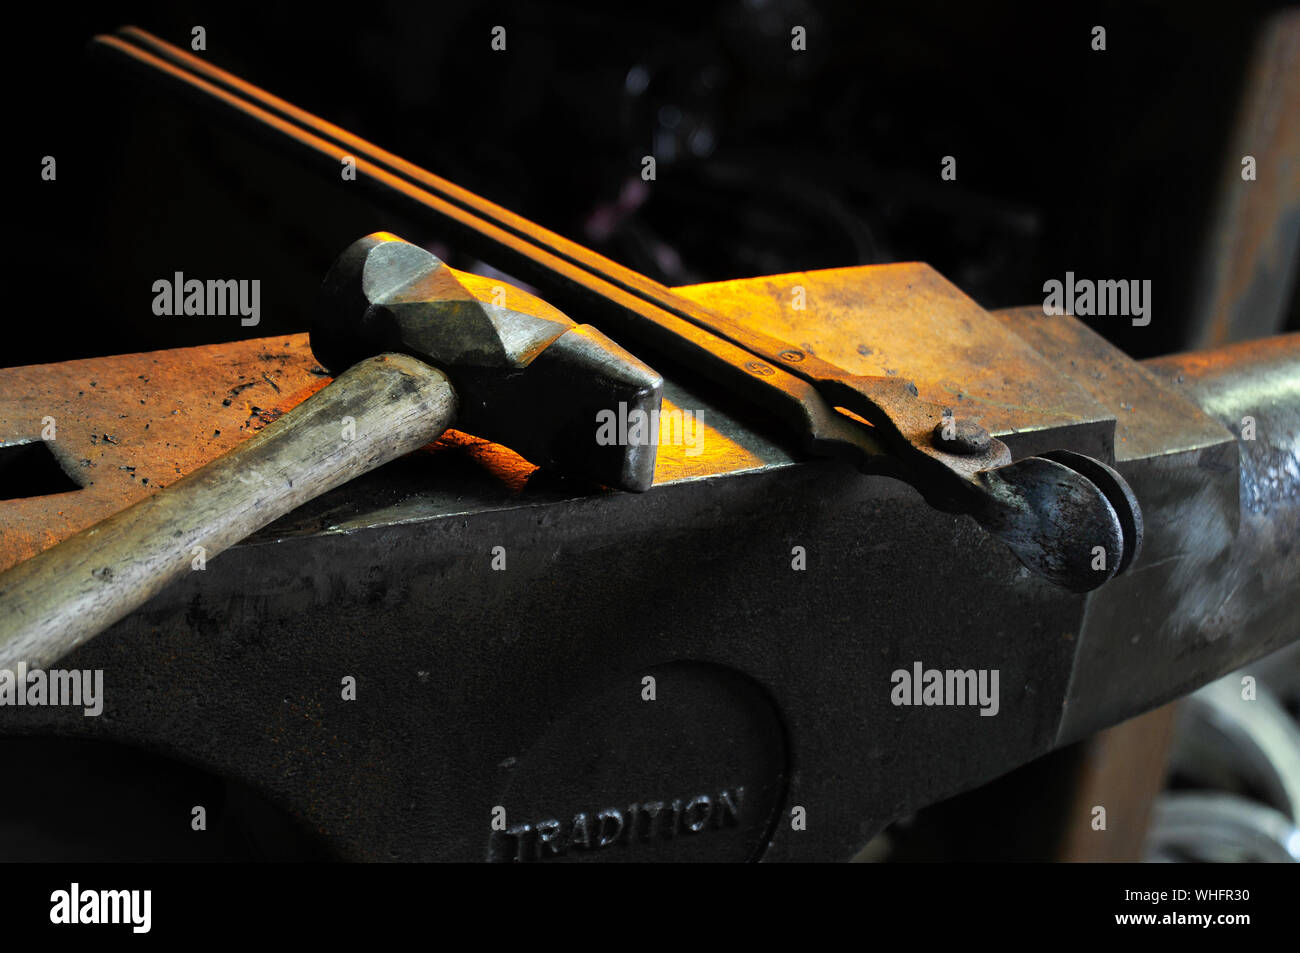 Tongs And Hammer On Anvil At Workshop Stock Photo